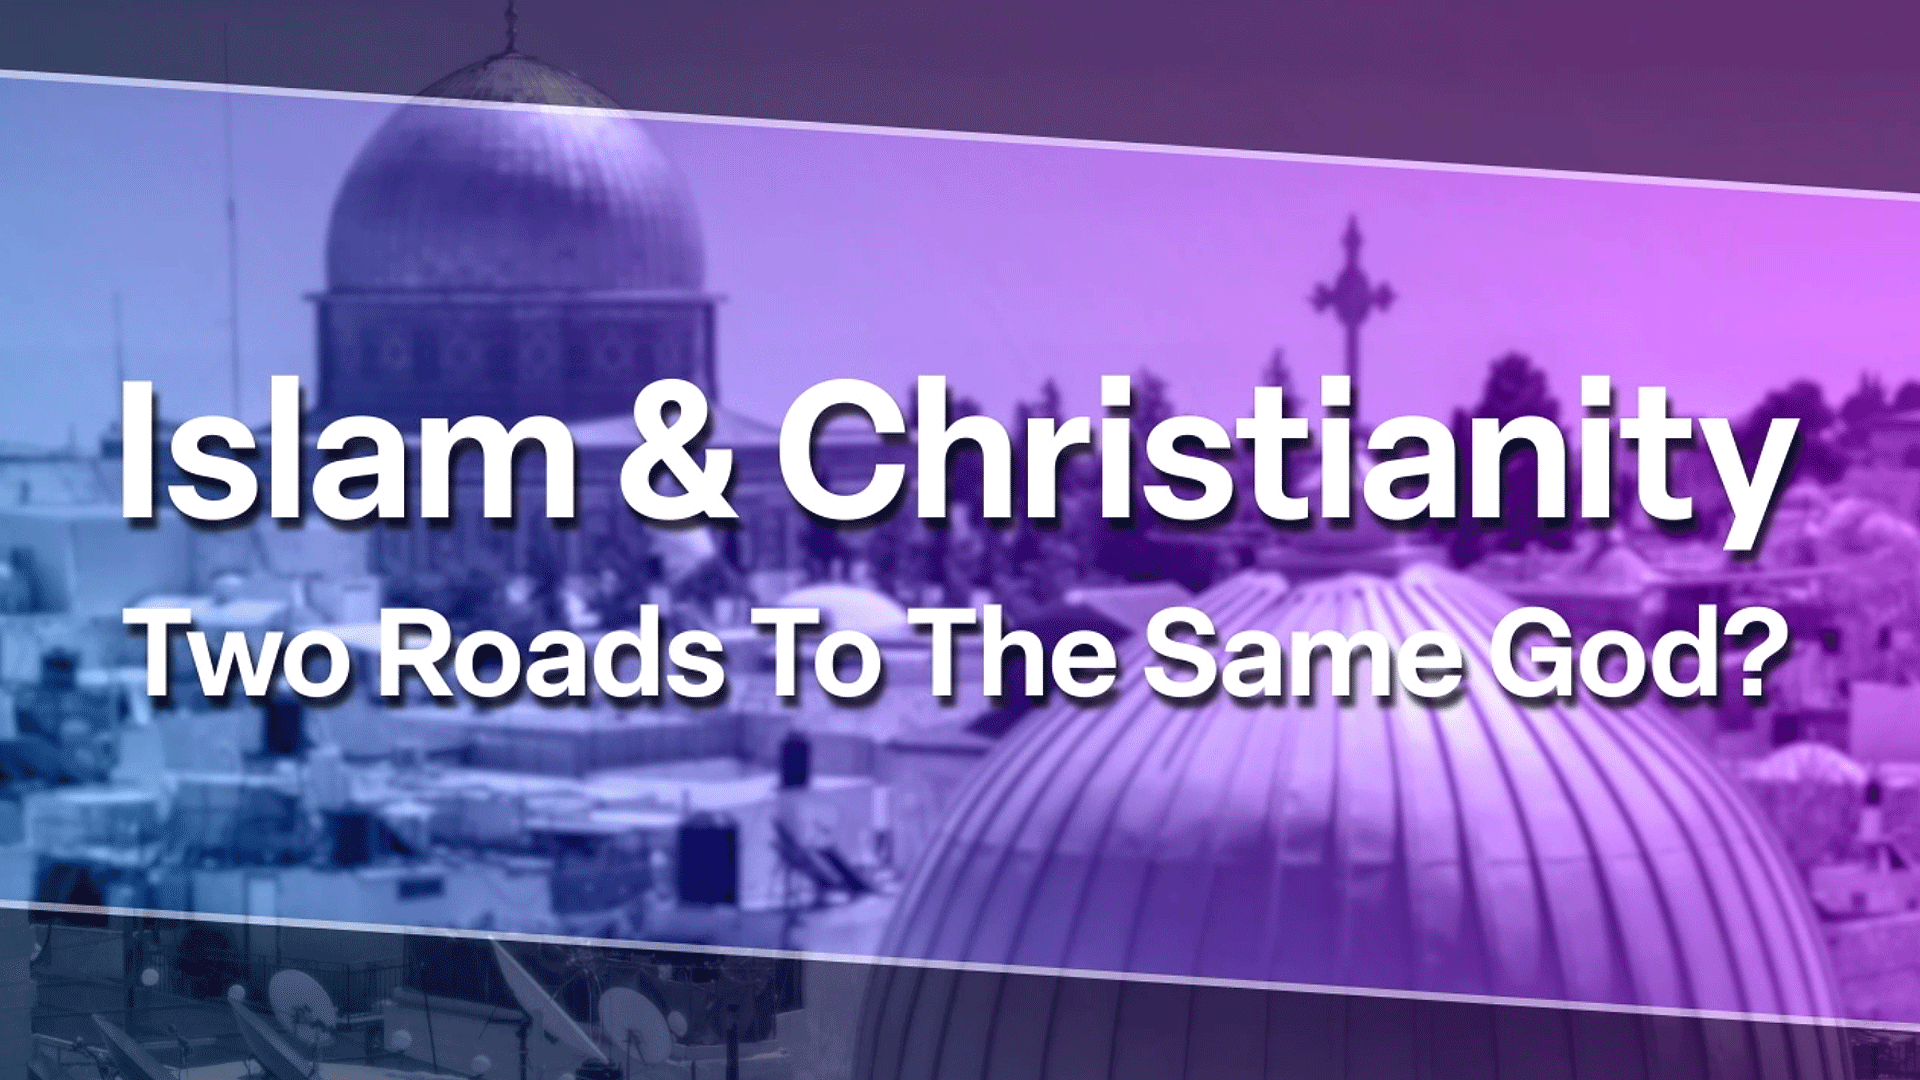 Islam & Christianity: Two Roads to the Same God?